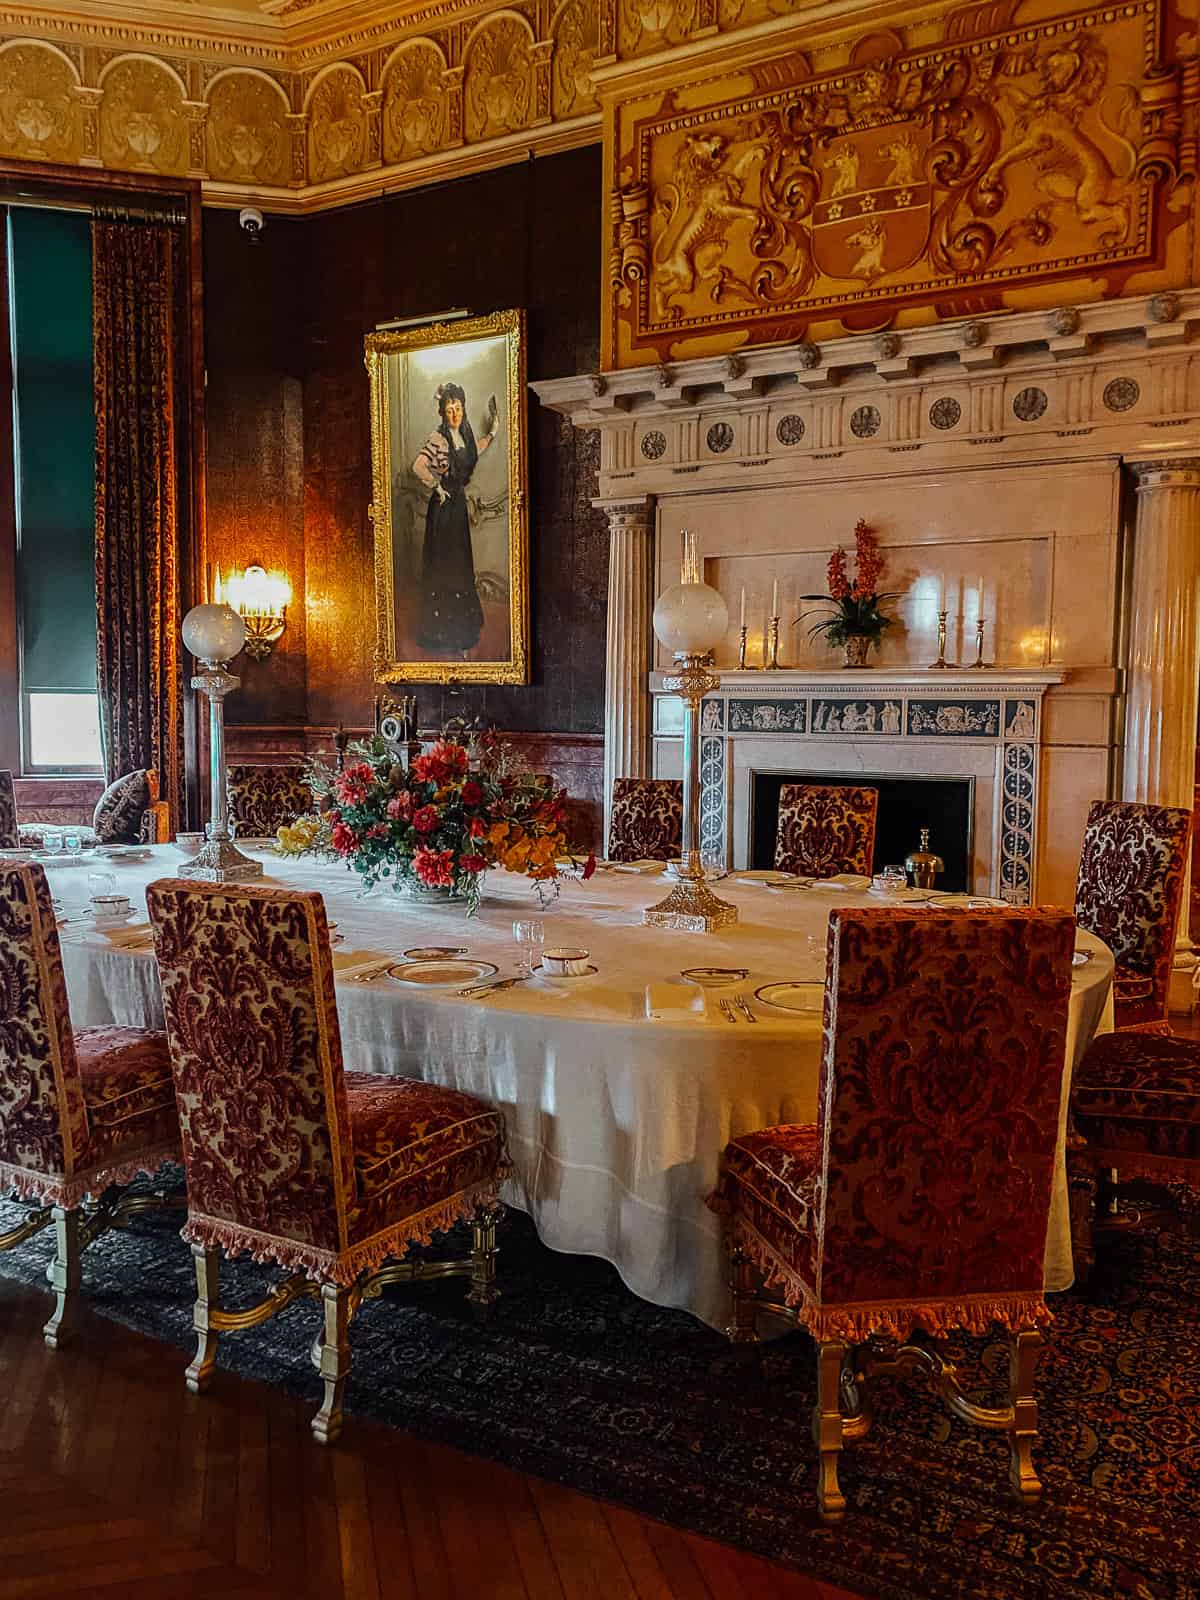 an old dining room in the Biltmore Estate with gold and red furniture